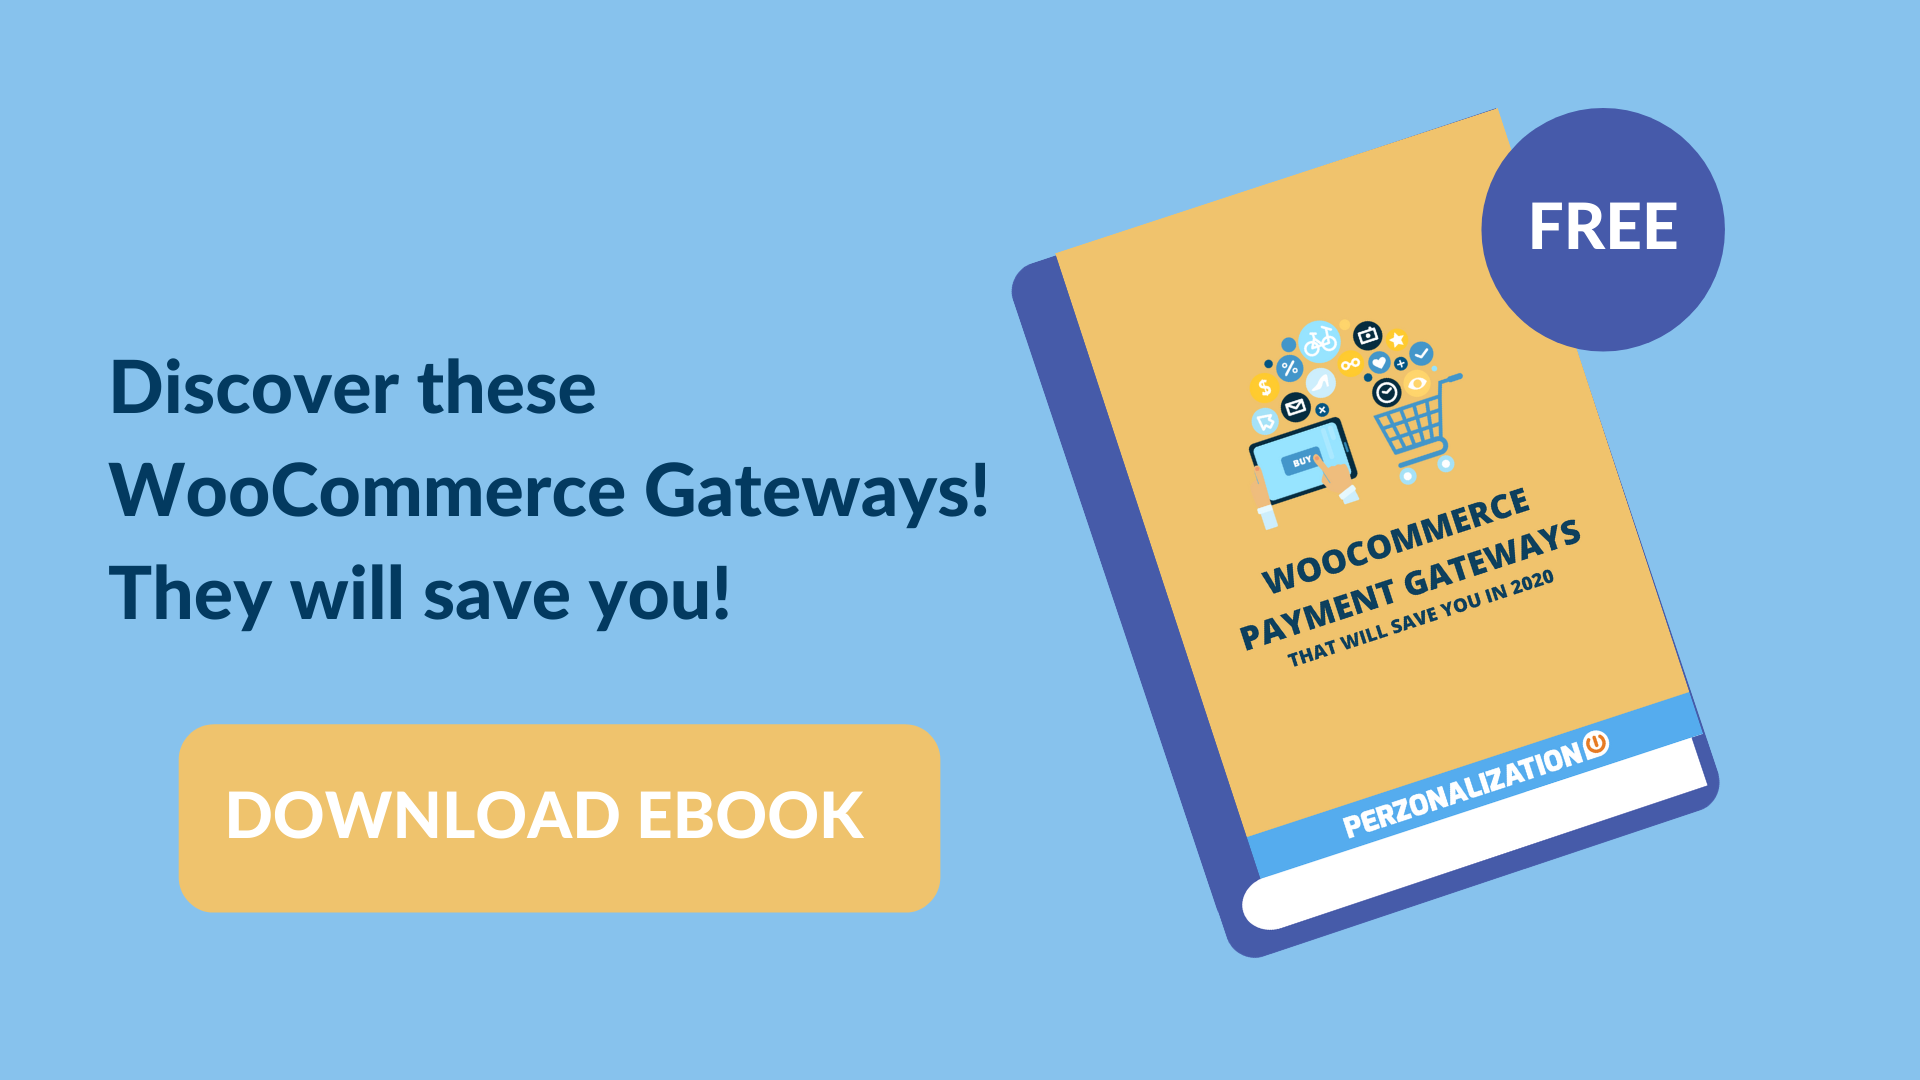 This eBook will give you an insight into payment gateways and explain in detail the importance of the best WooCommerce payment gateways.